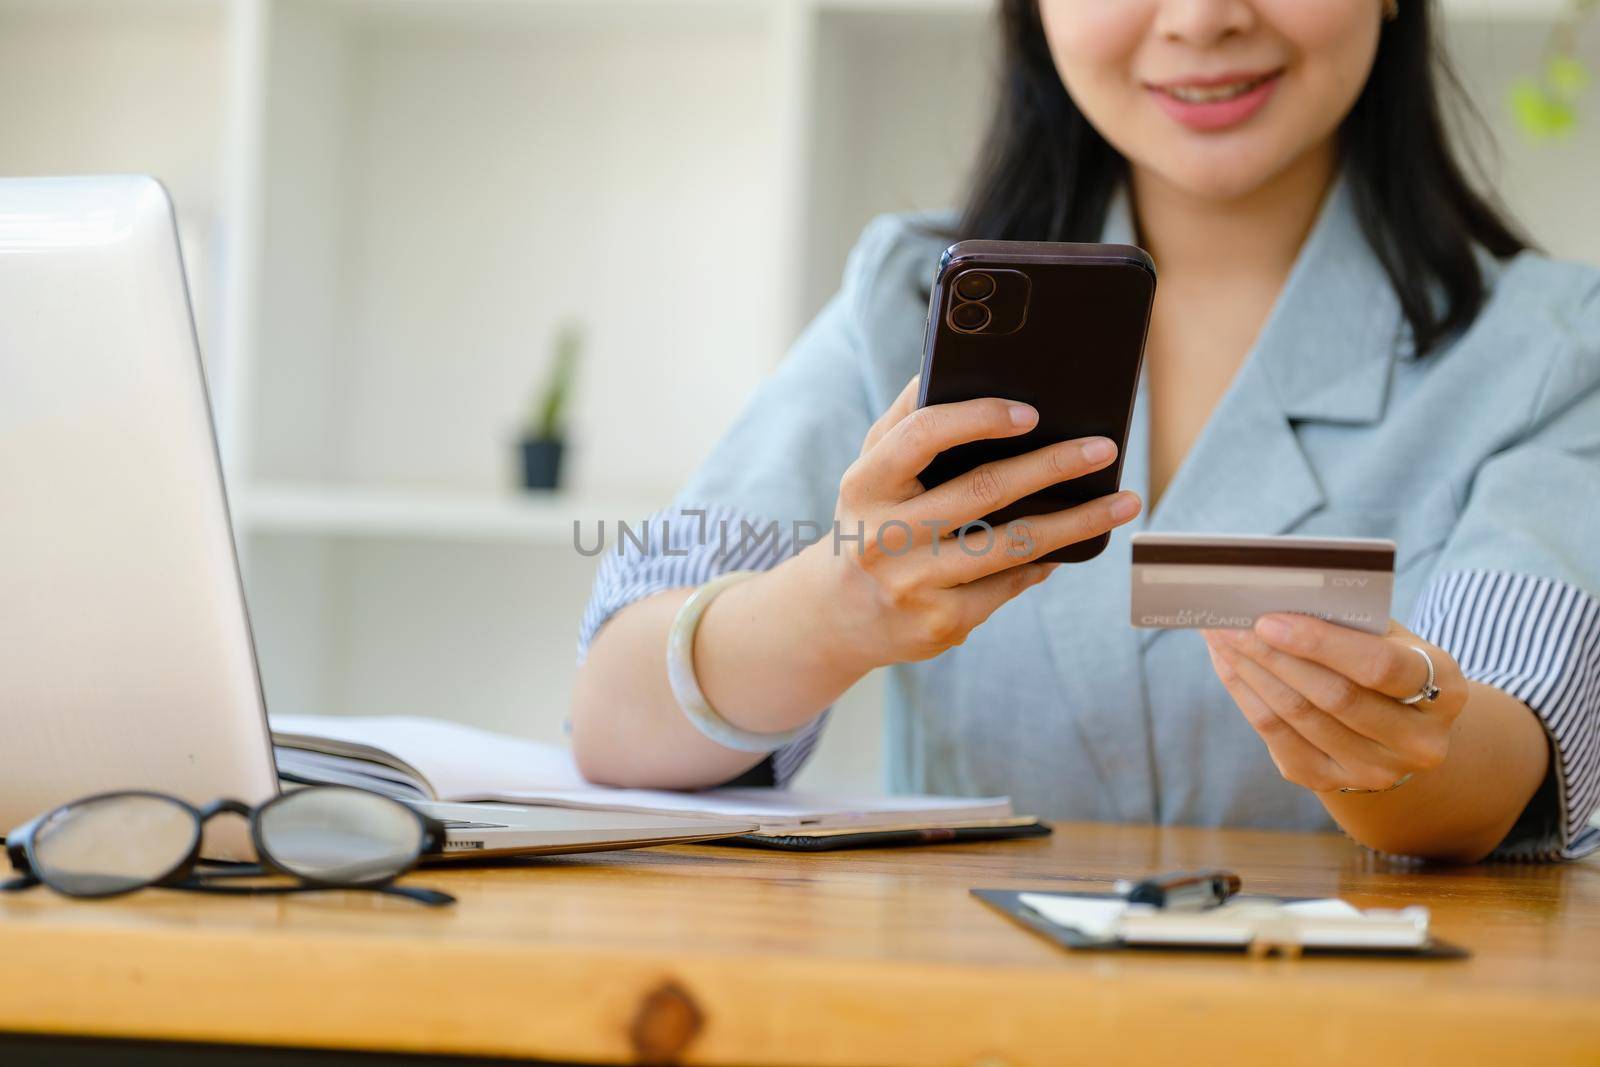 Online Shopping and Internet Payments, Asian women are using their smartphone mobile and credit cards to shop online or conduct errands in the digital world.